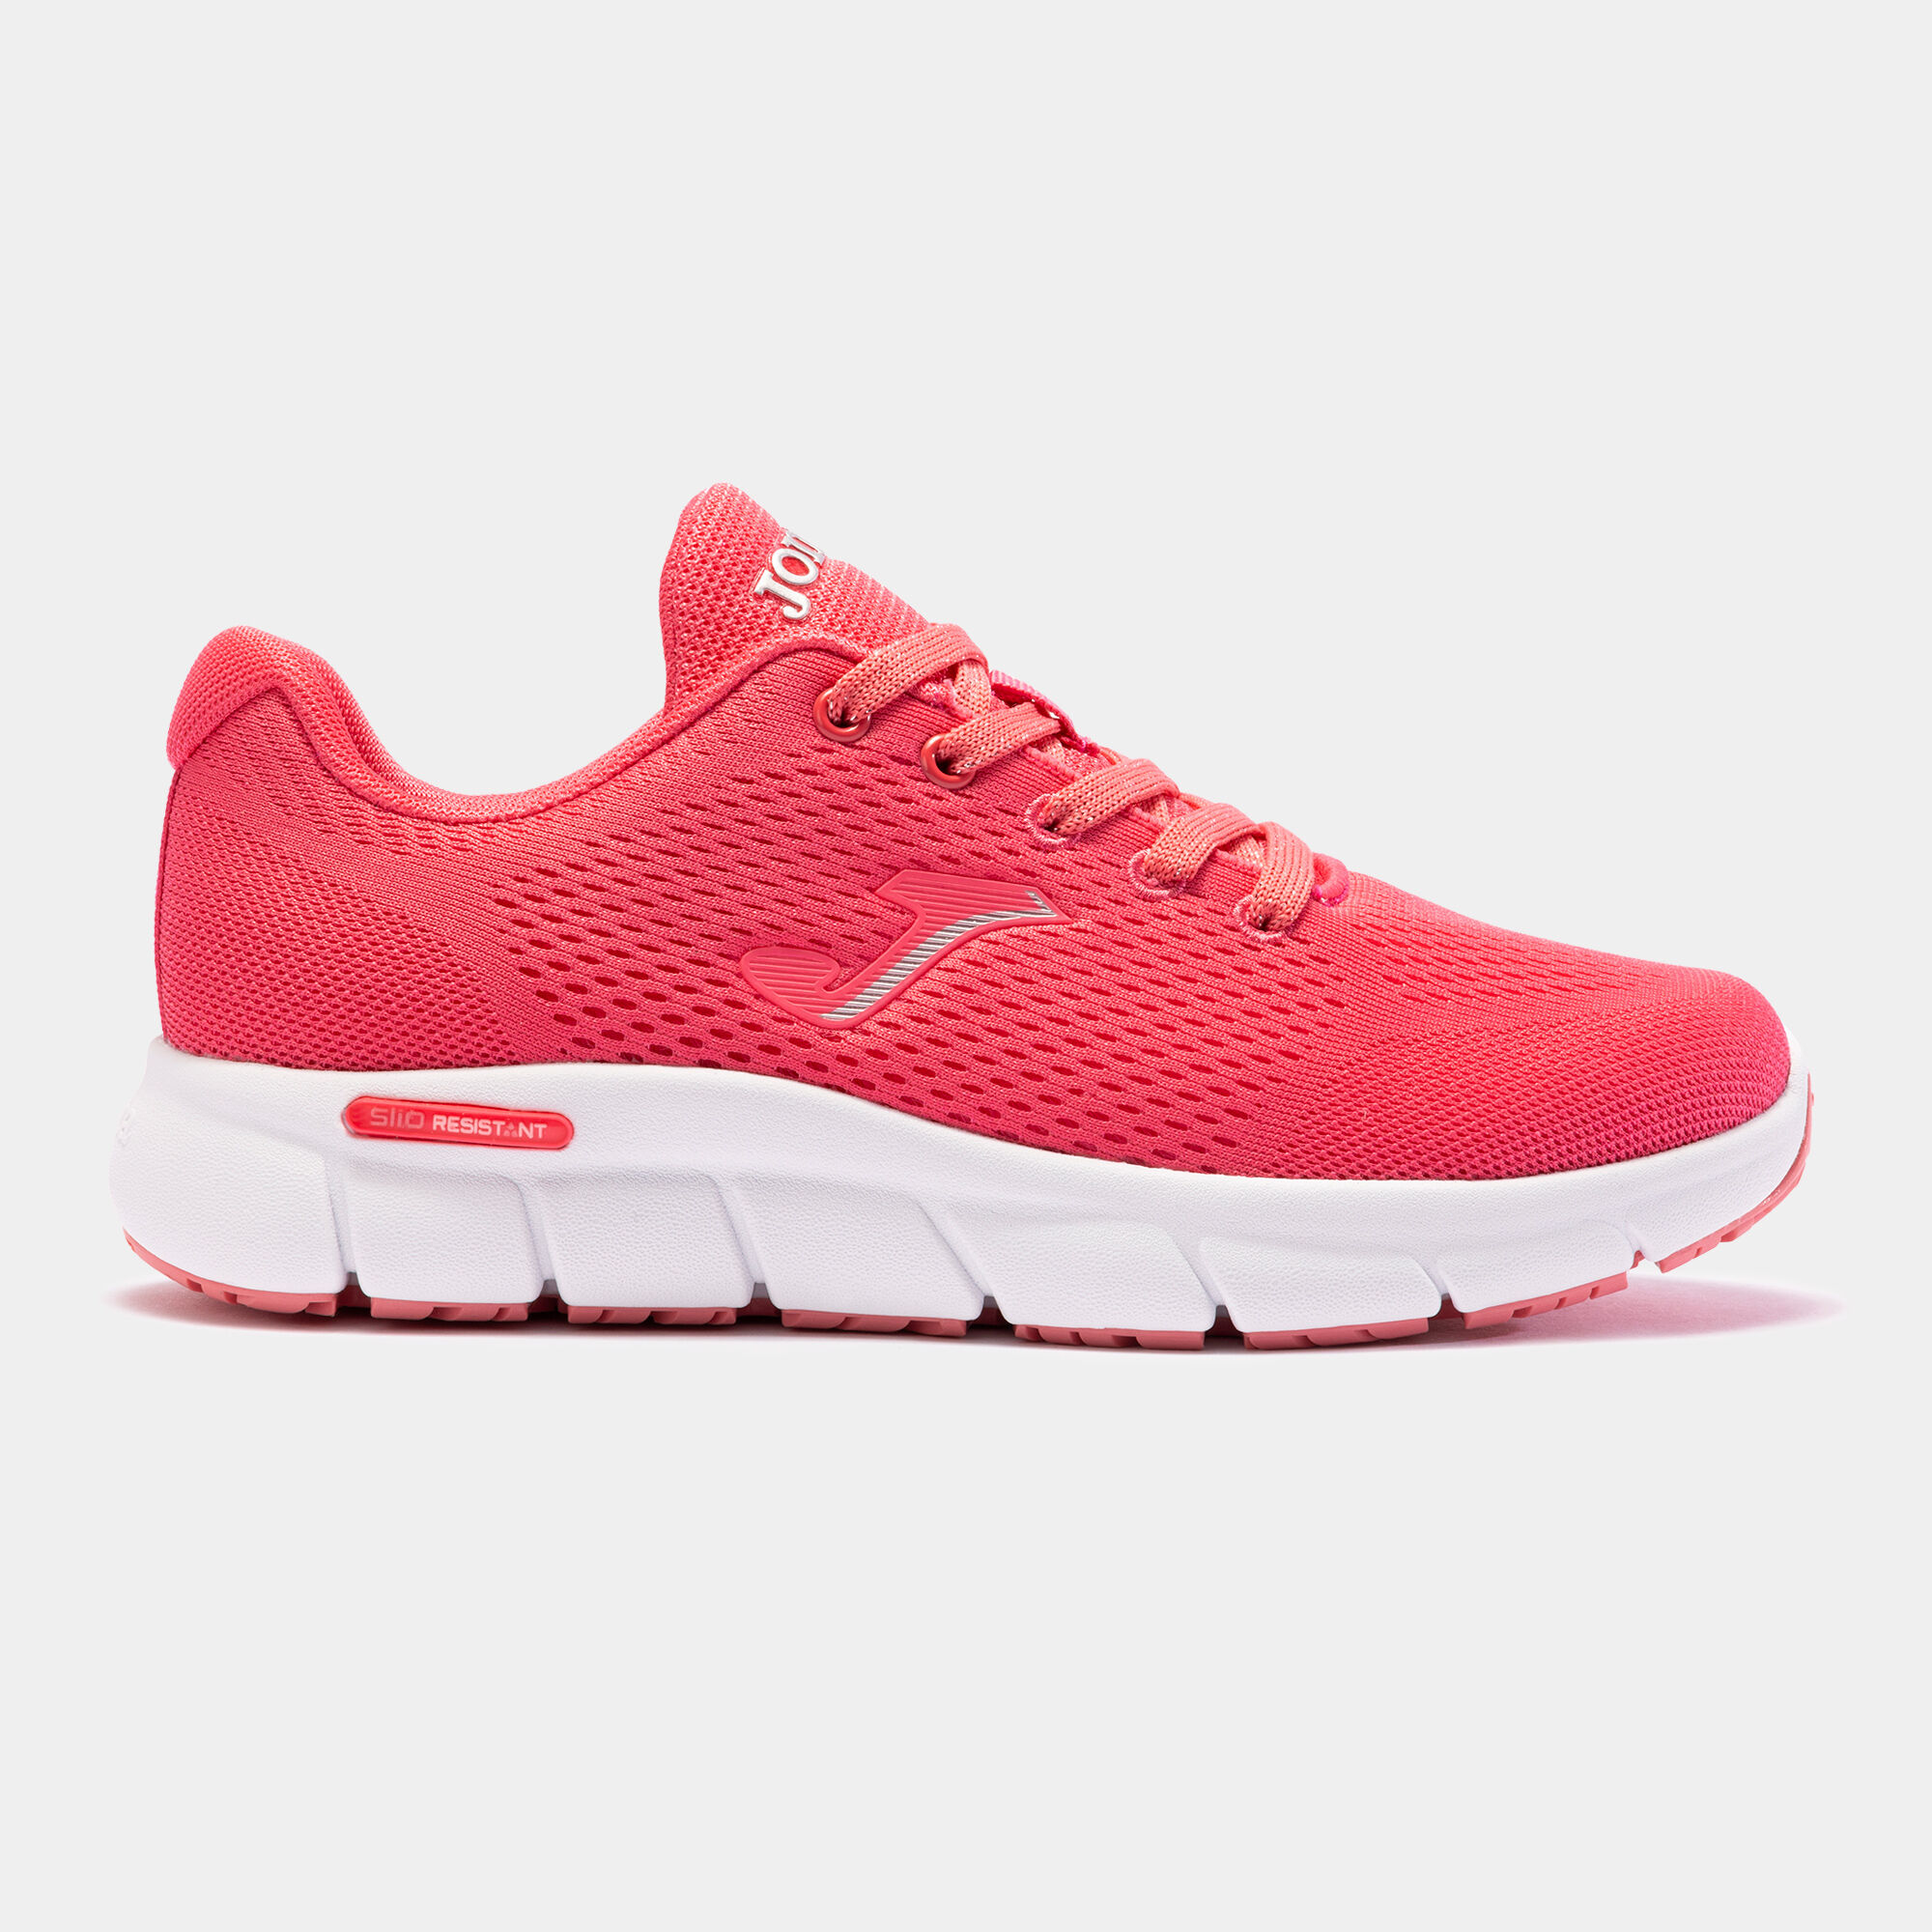 Chaussures casual Zen Lady 24 femme rose